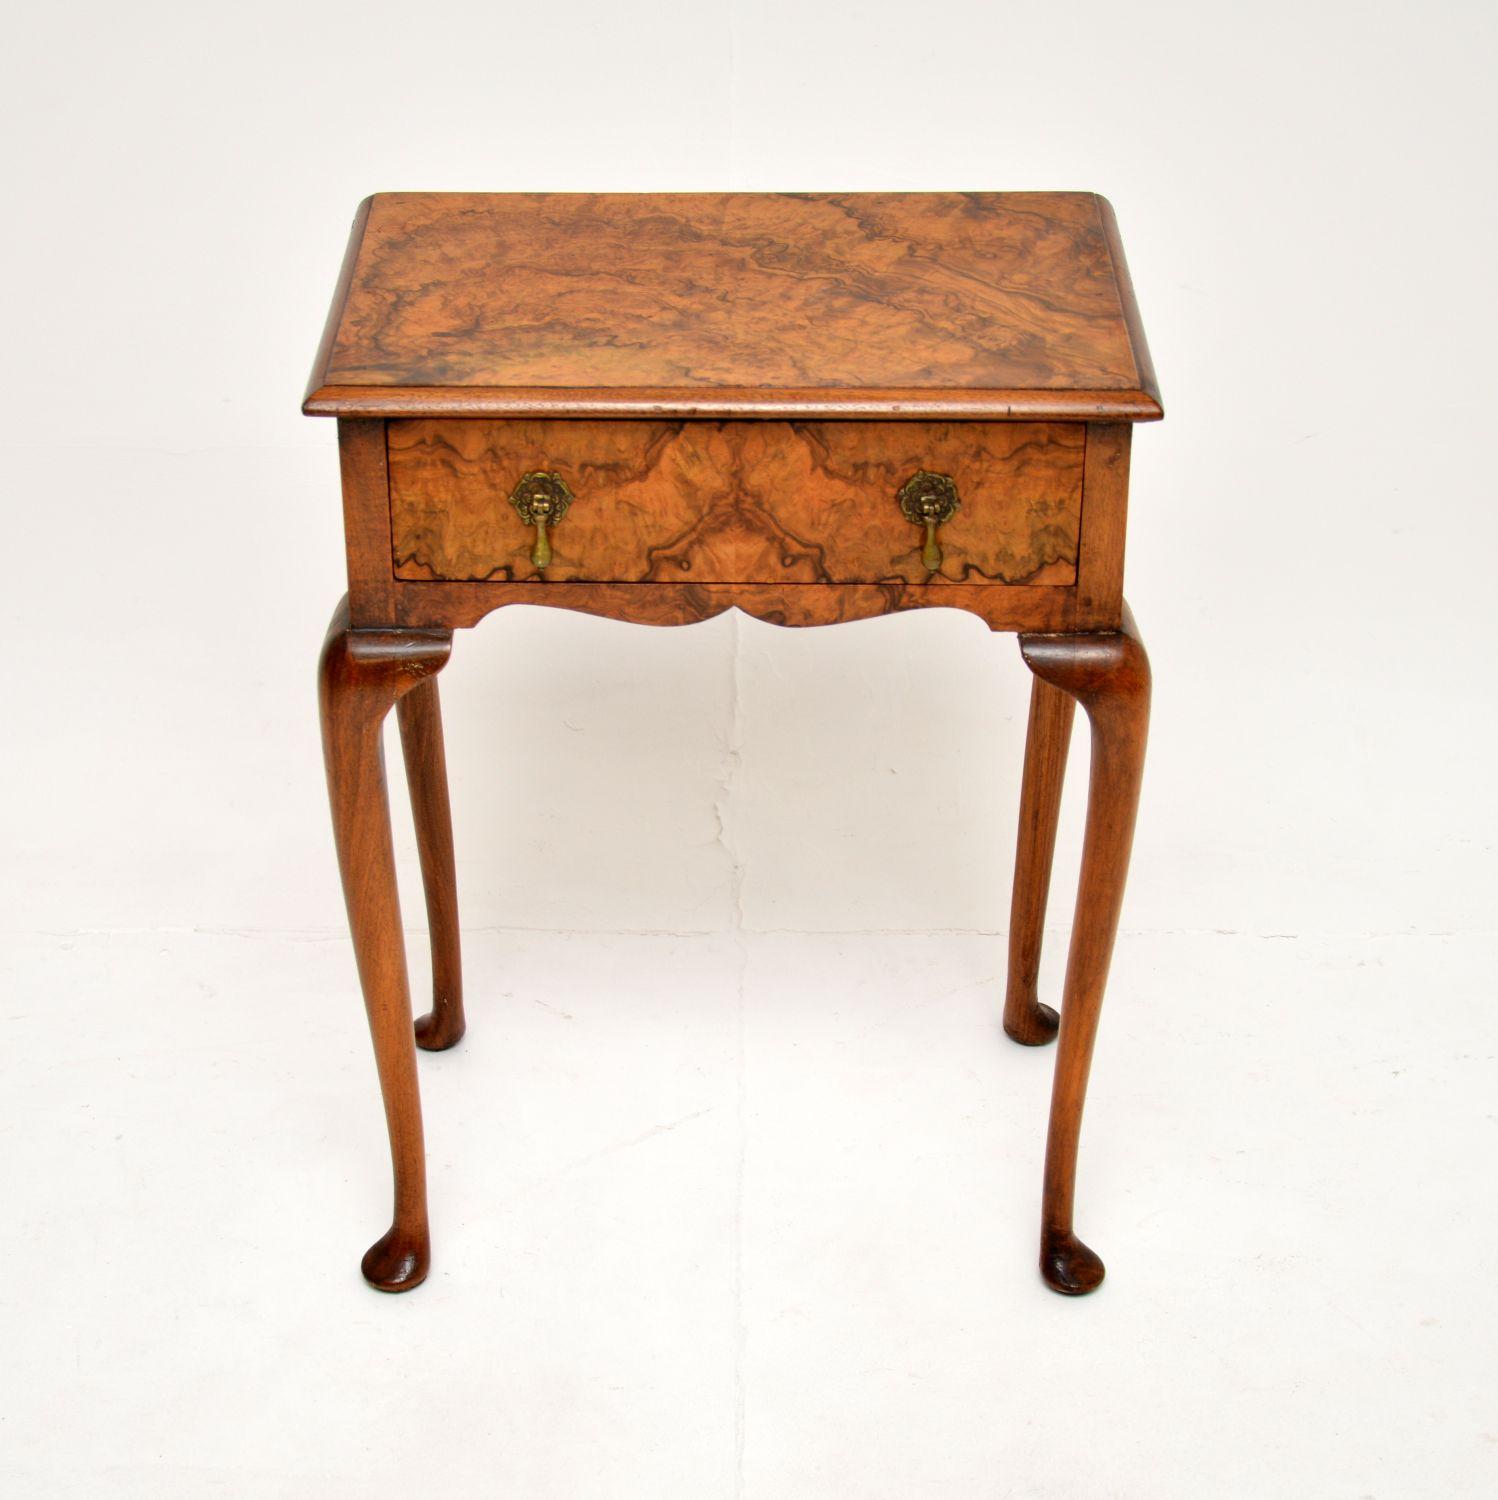 A beautiful antique burr walnut side table, made in England and dating from around 1900-1910.

It is of lovely quality, with stunning burr walnut grain patterns. There is a single drawer with solid brass tear drop handles, the back is also nicely